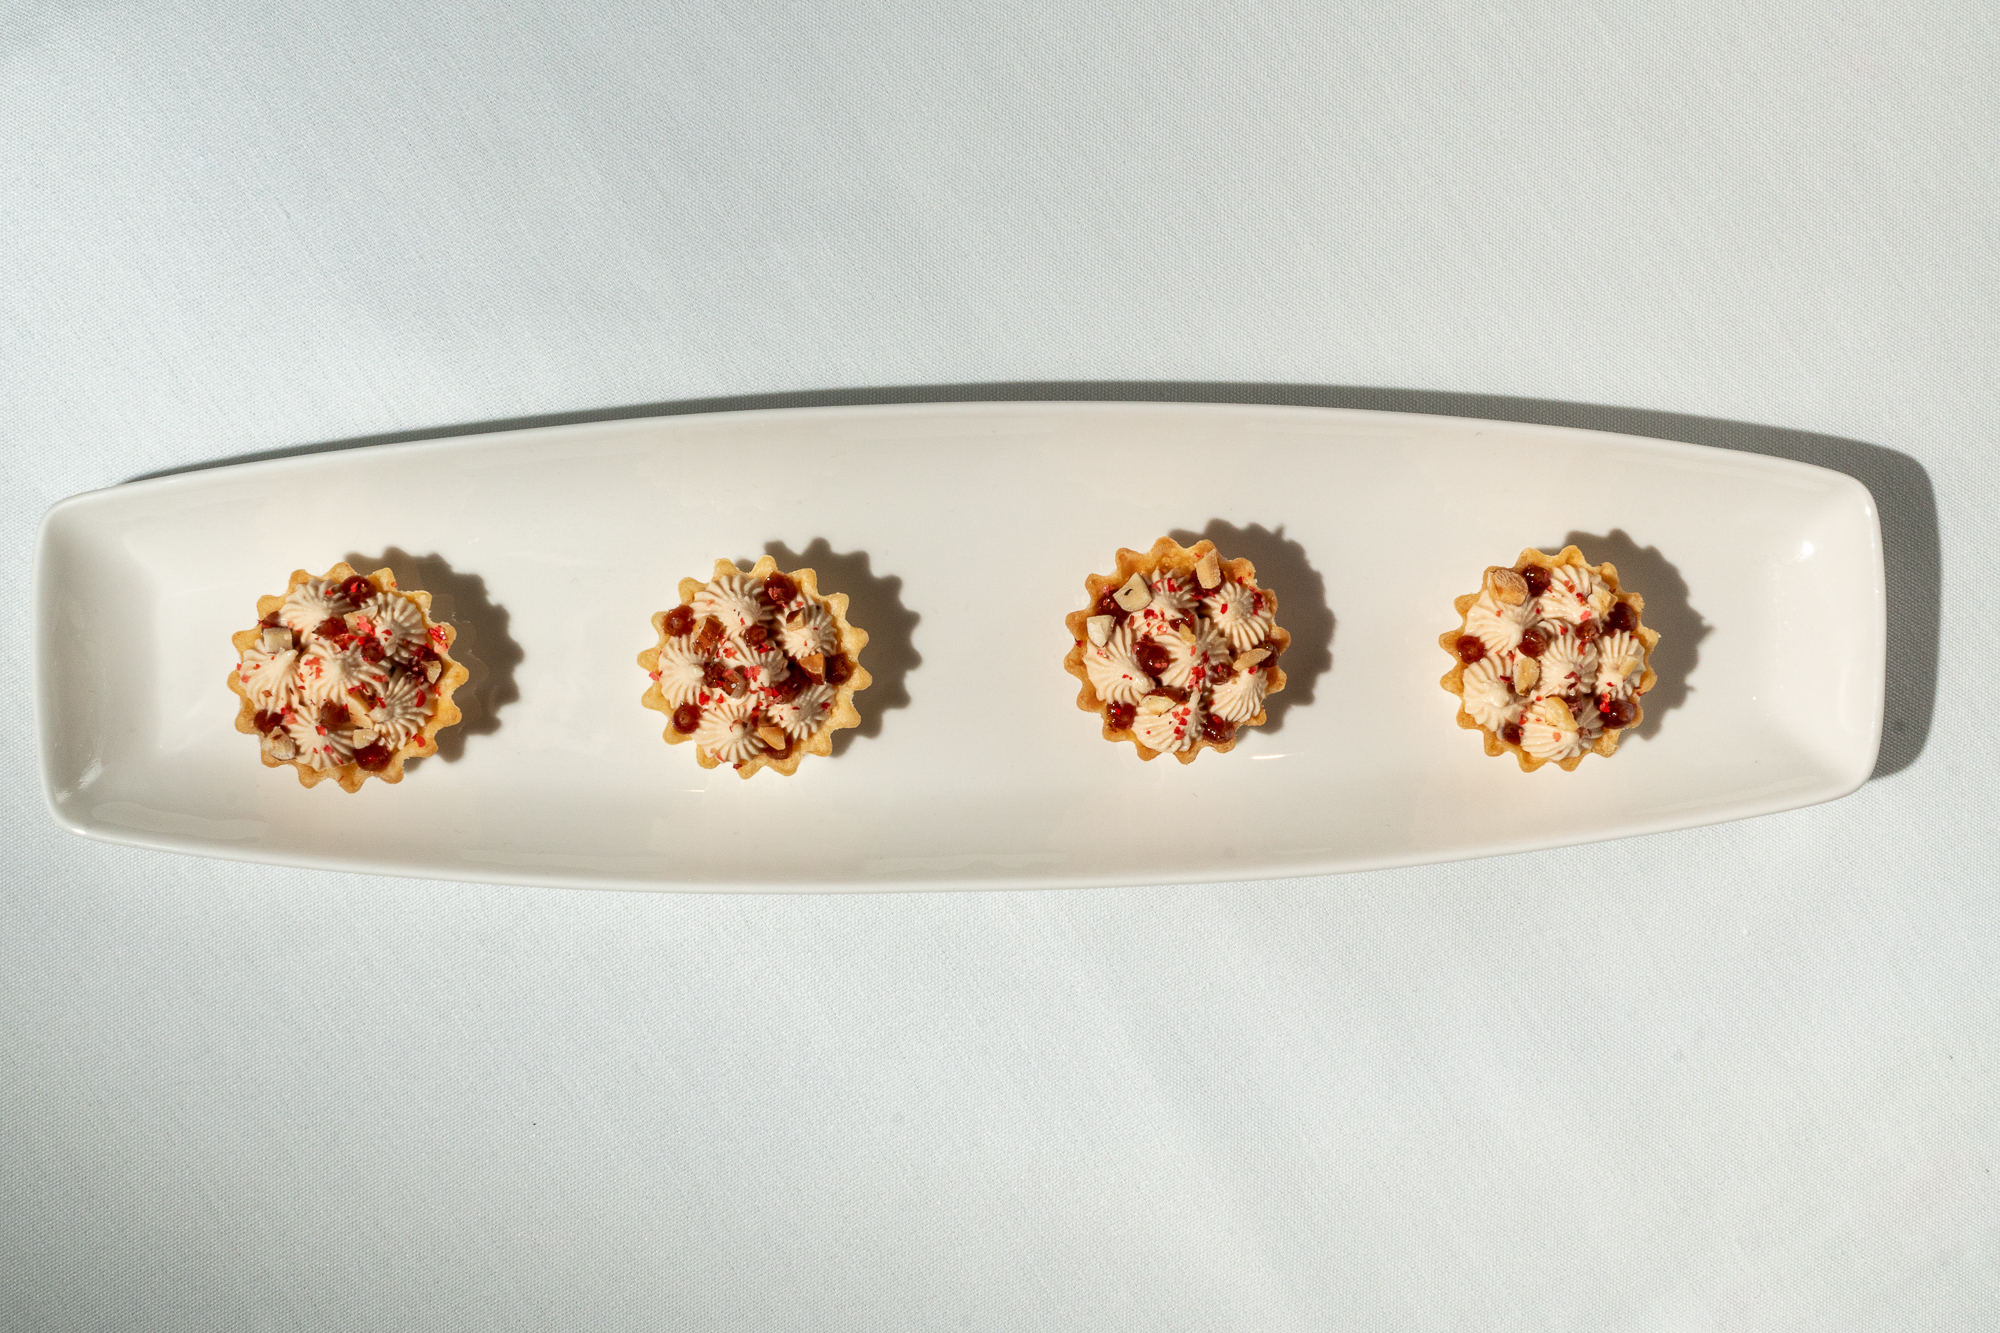 These foie gras tarts showcase the restraint and the discipline of cooking of Miko Calo